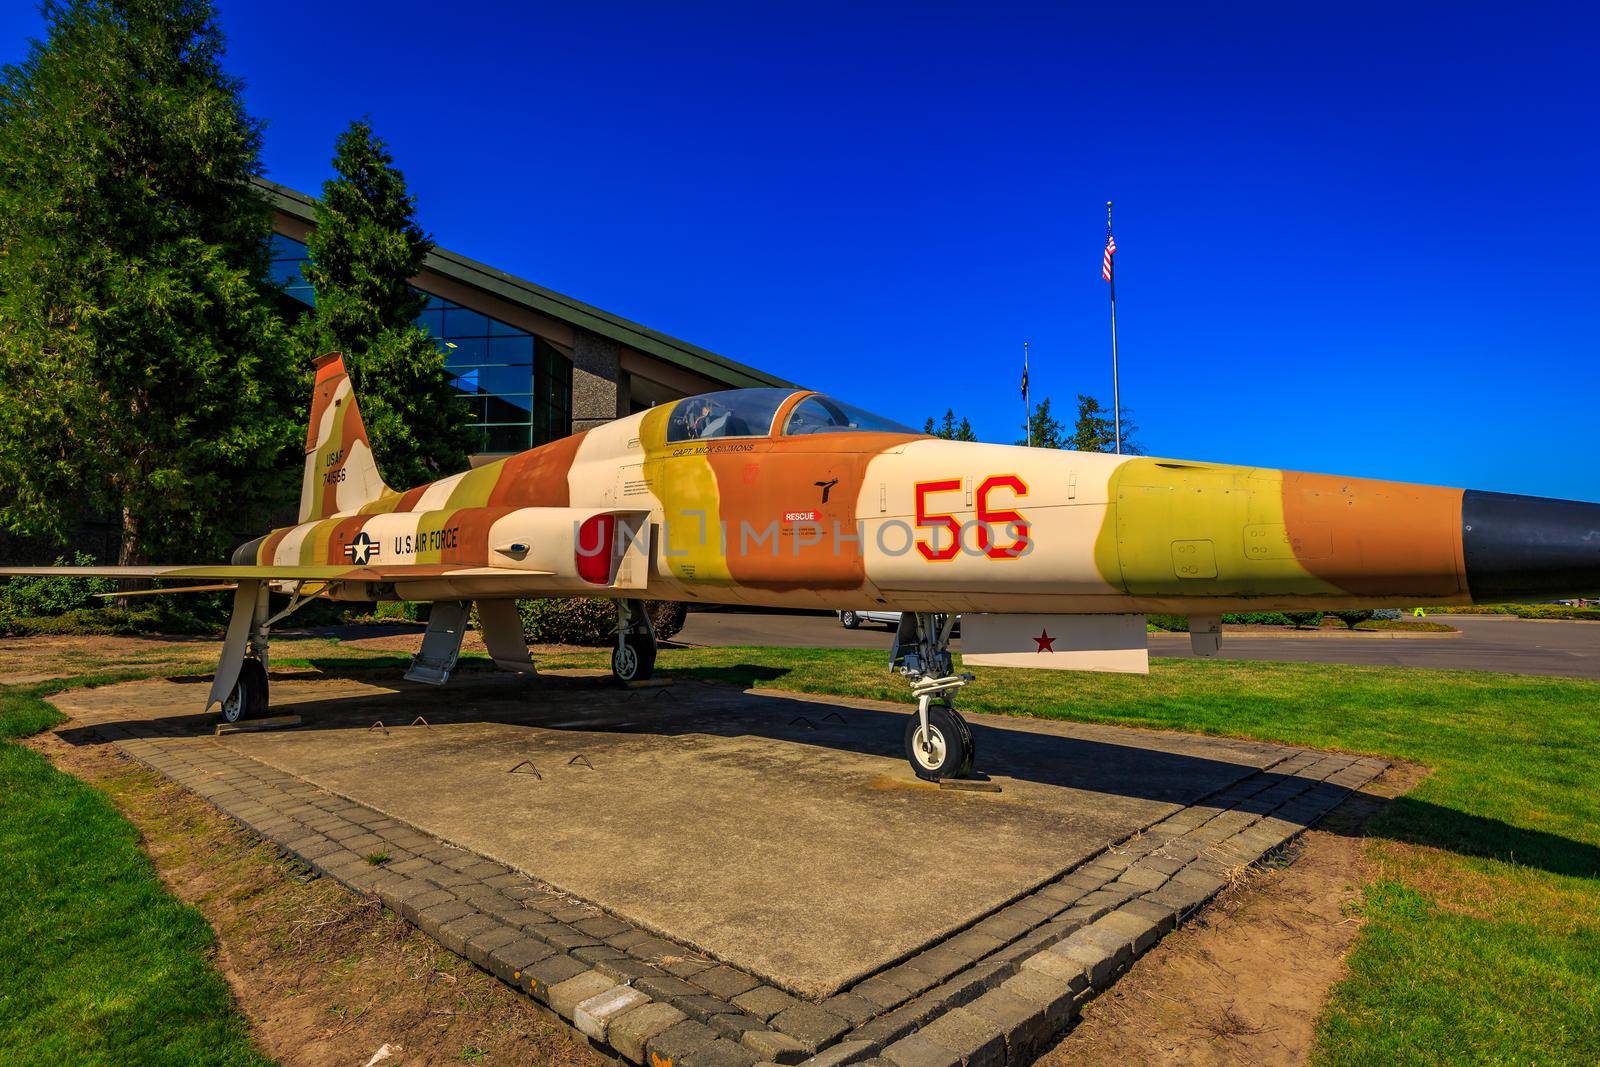 McMinnville, Oregon - August 21, 2017: US Air Force Northrop F-5E Tiger II with desert strip on exhibition at Evergreen Aviation & Space Museum.